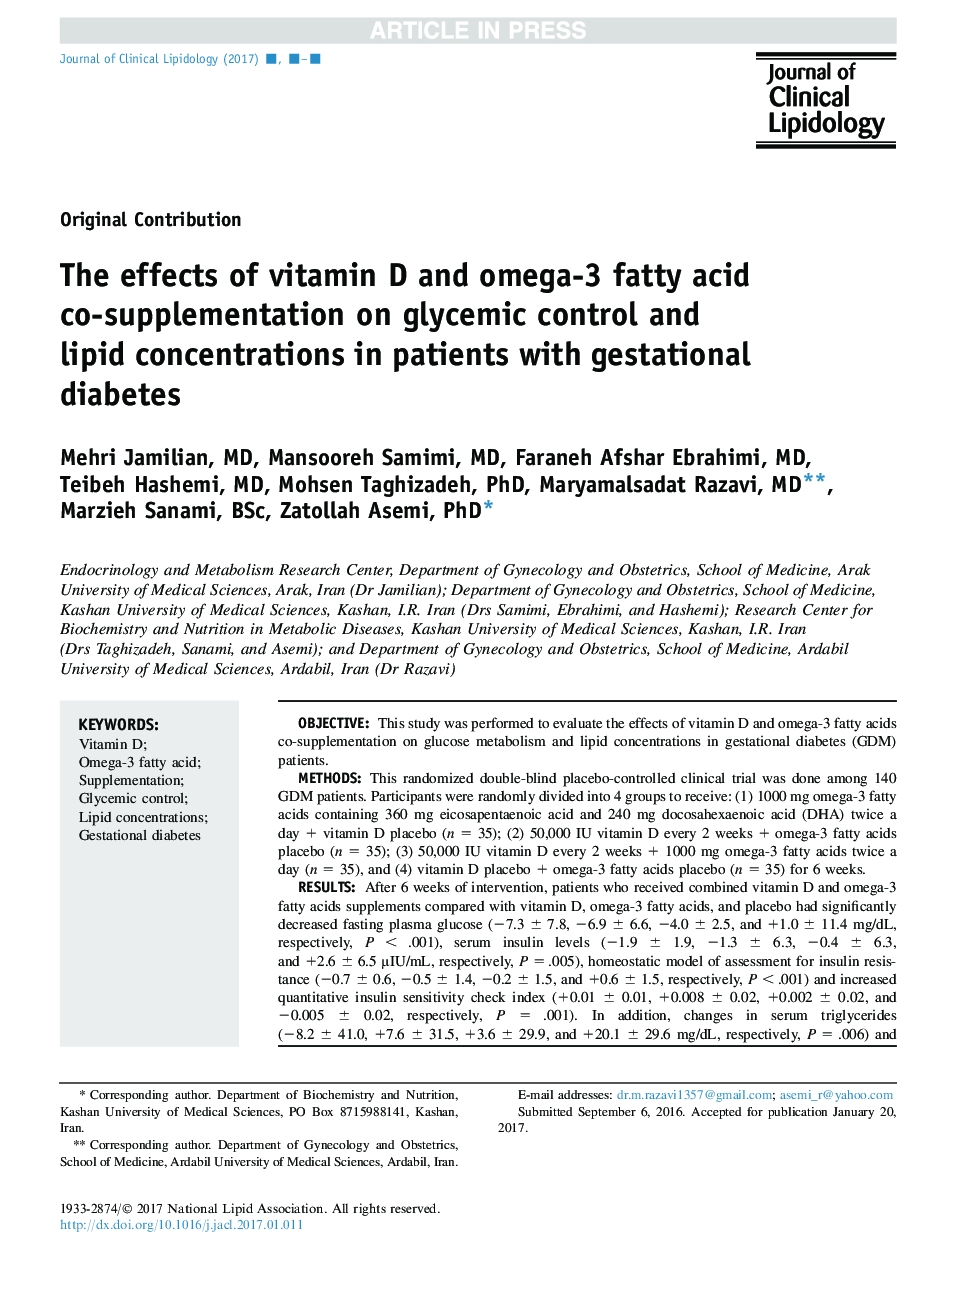 The effects of vitamin D and omega-3 fatty acid co-supplementation on glycemic control and lipid concentrations in patients with gestational diabetes